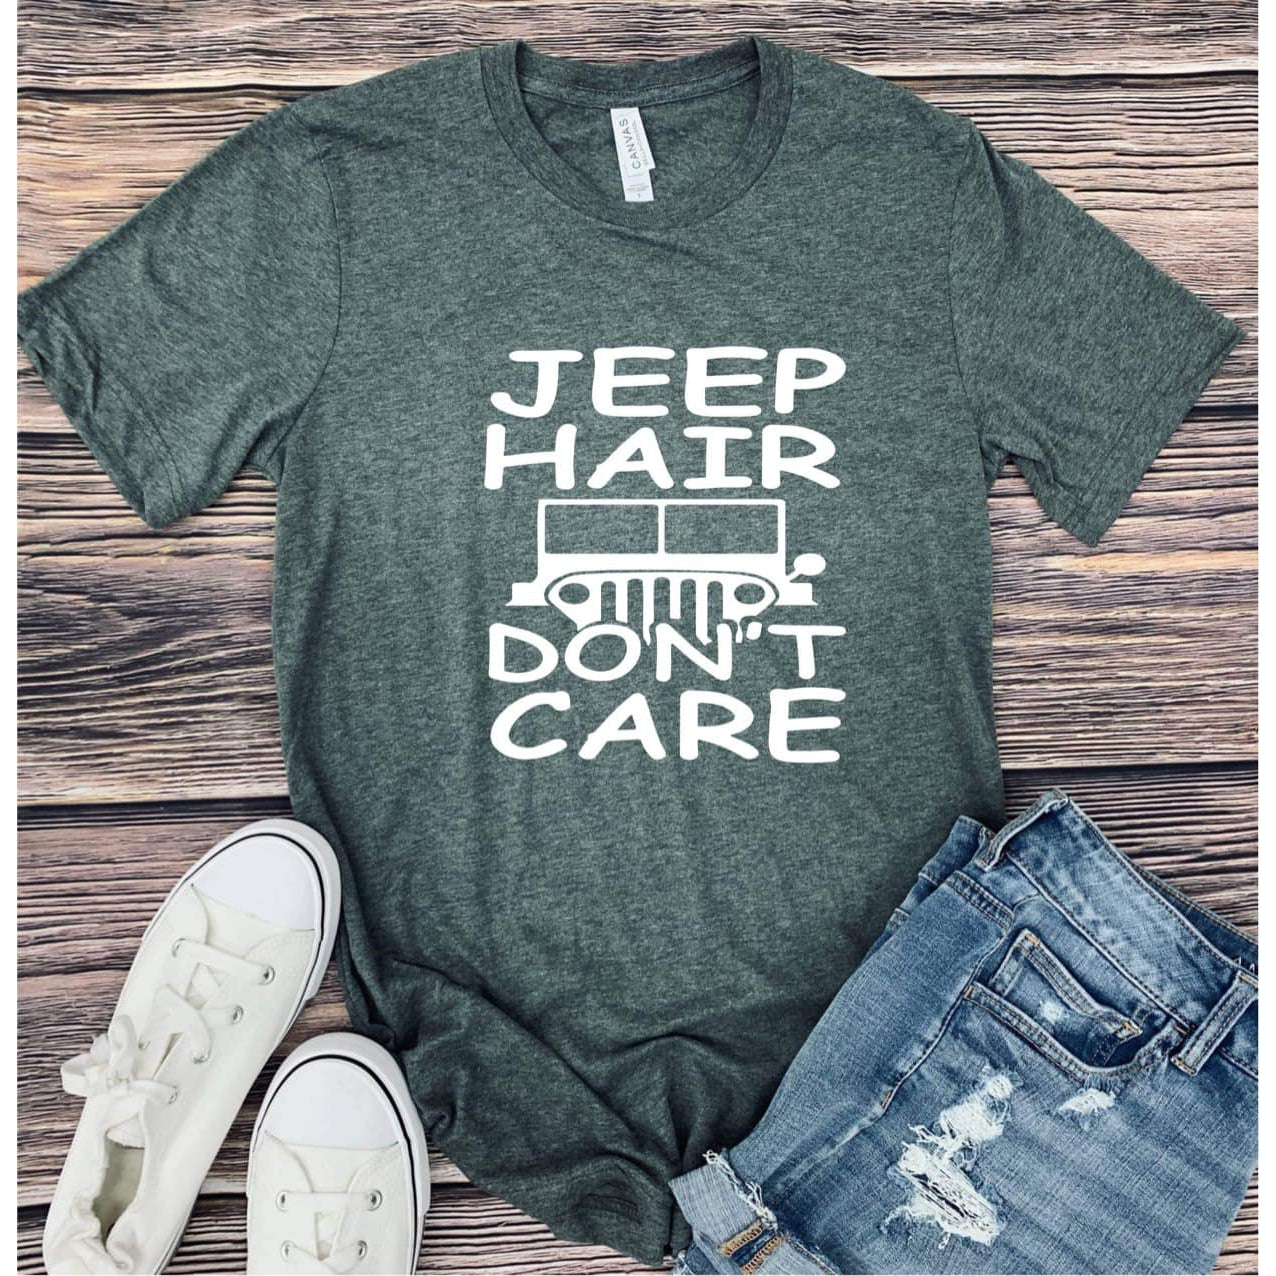 Jeep hair dont care graphic tee